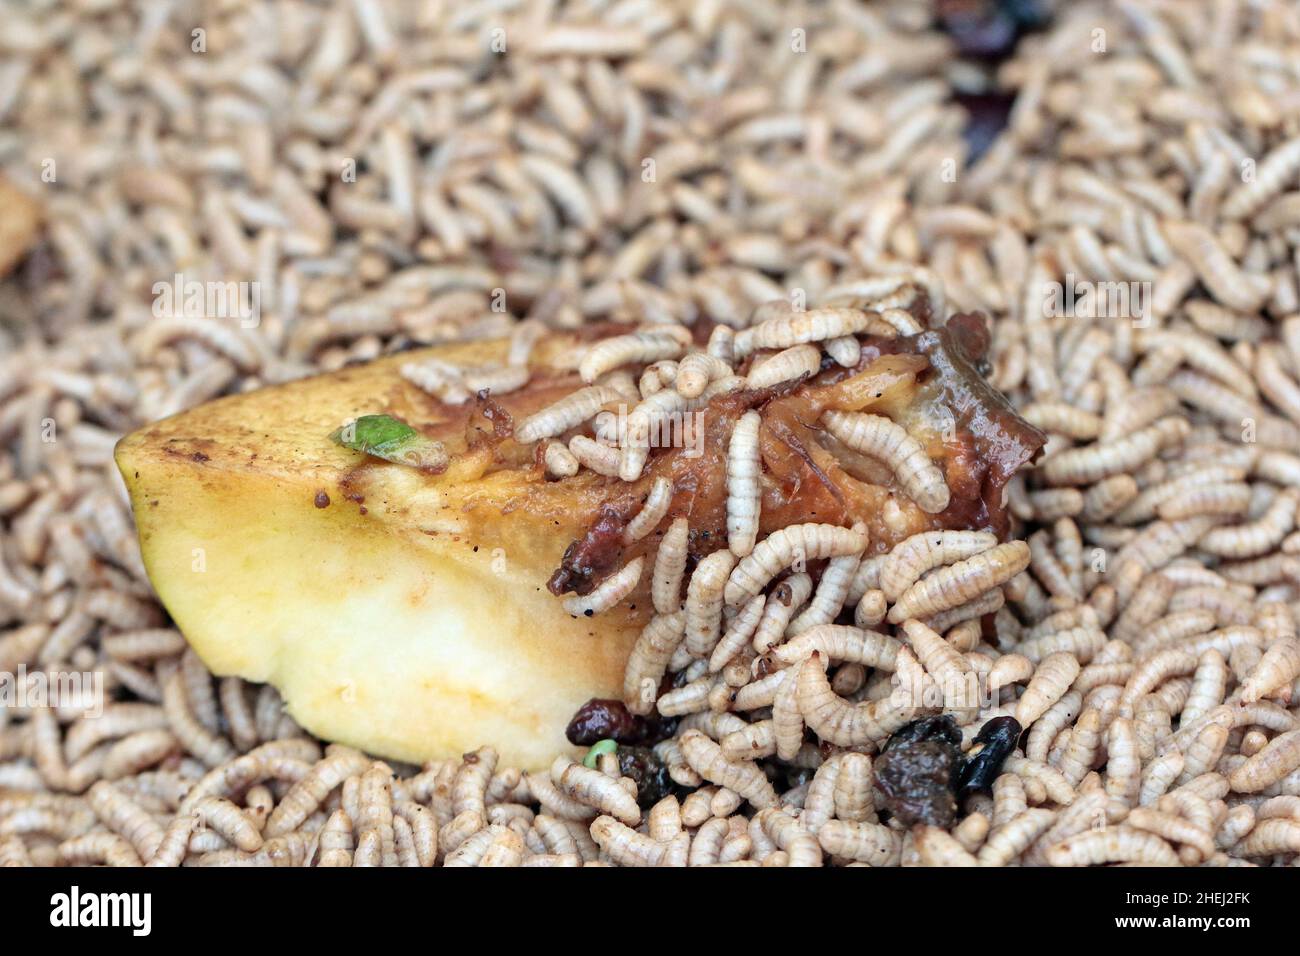 Hermetia illucens, the black soldier fly. Larvae eats an apple fruit. Protein animal feed ingredient. Stock Photo